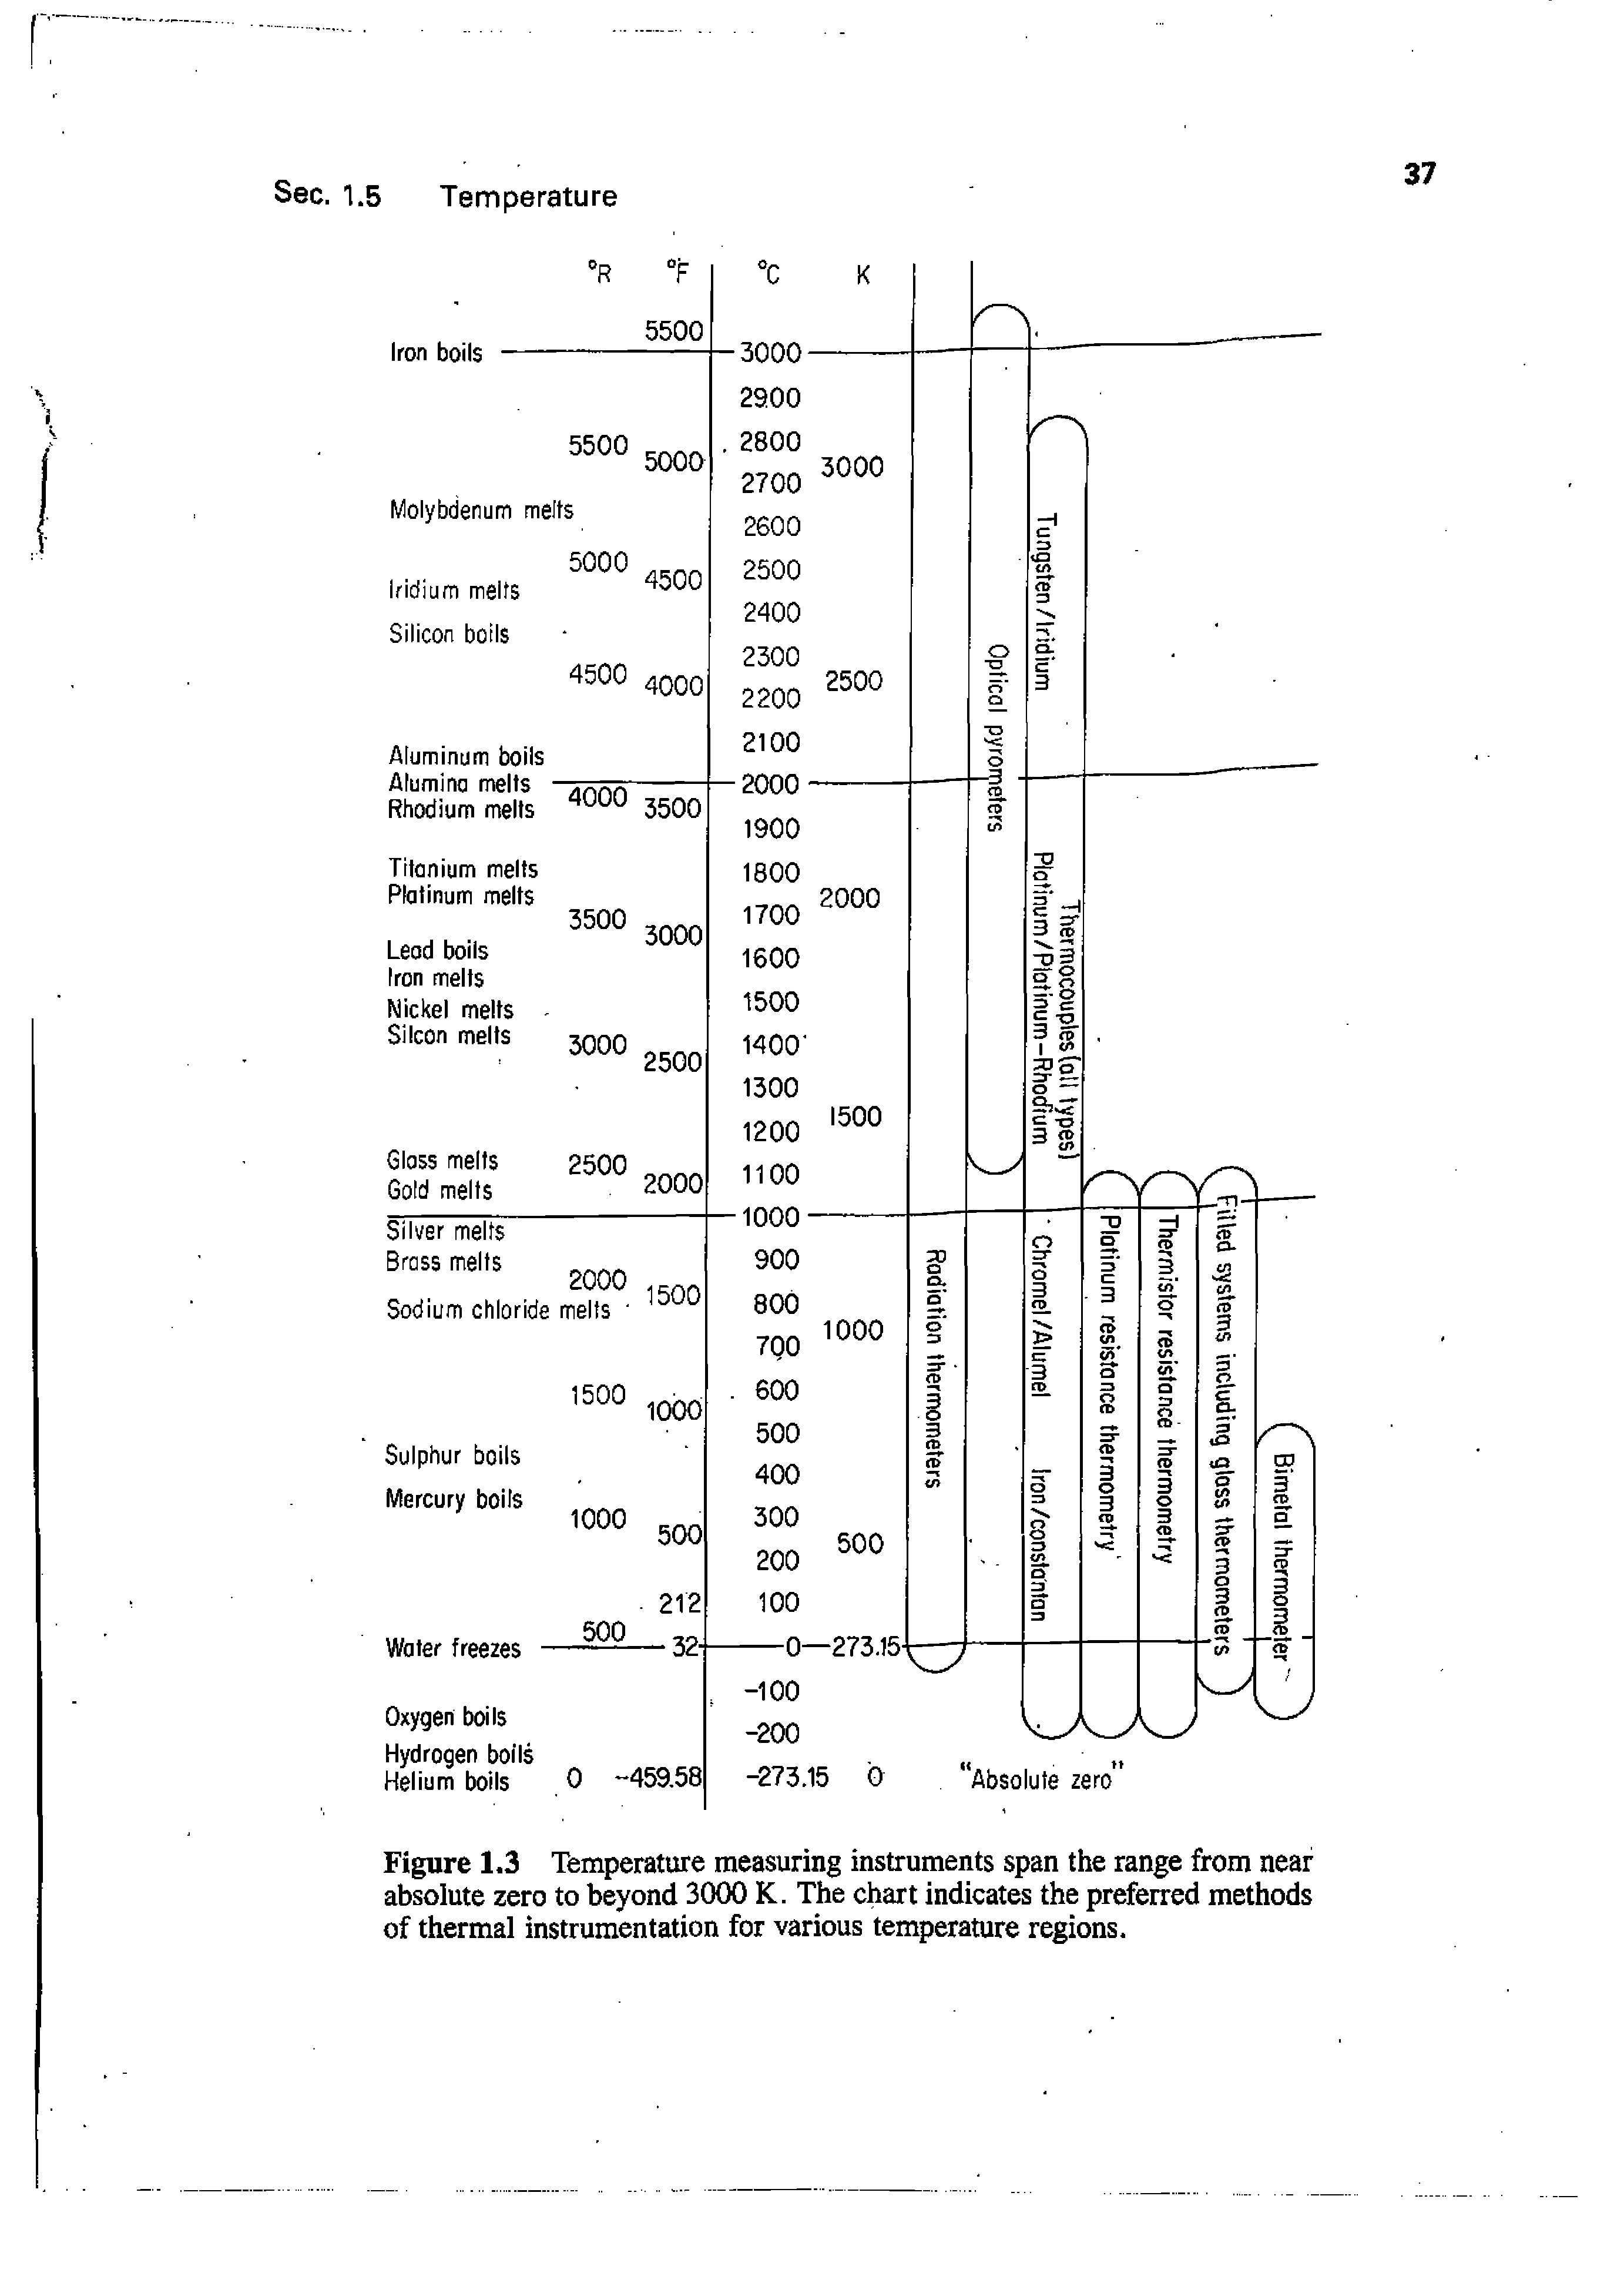 Figure 1.3 Temperature measuring instruments span the range from near absolute zero to beyond 3000 K. The chart indicates the preferred methods of thermal instrumentation for various temperature regions.